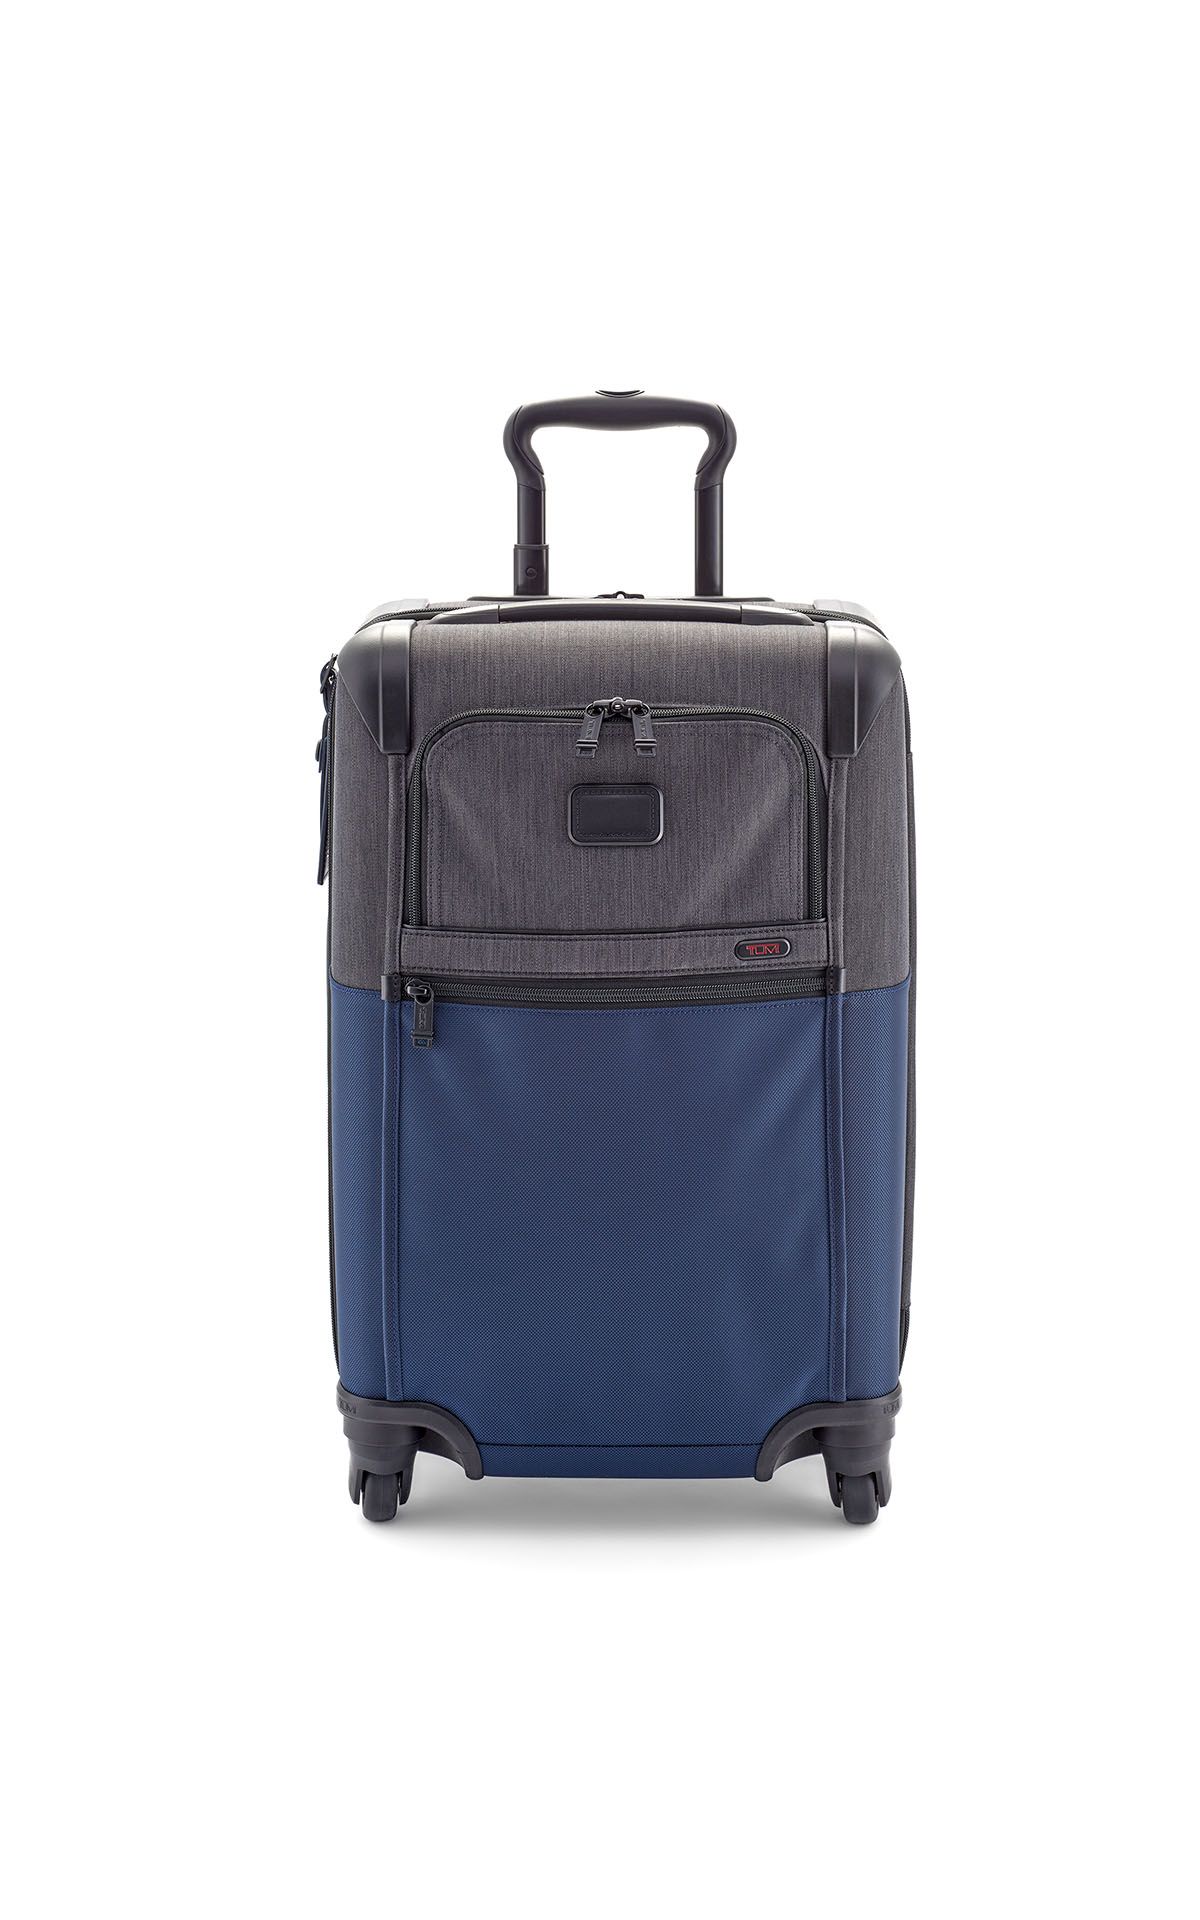 Tumi Intl Exp 4 Wheel Carry On at The Bicester Village Shopping Collection